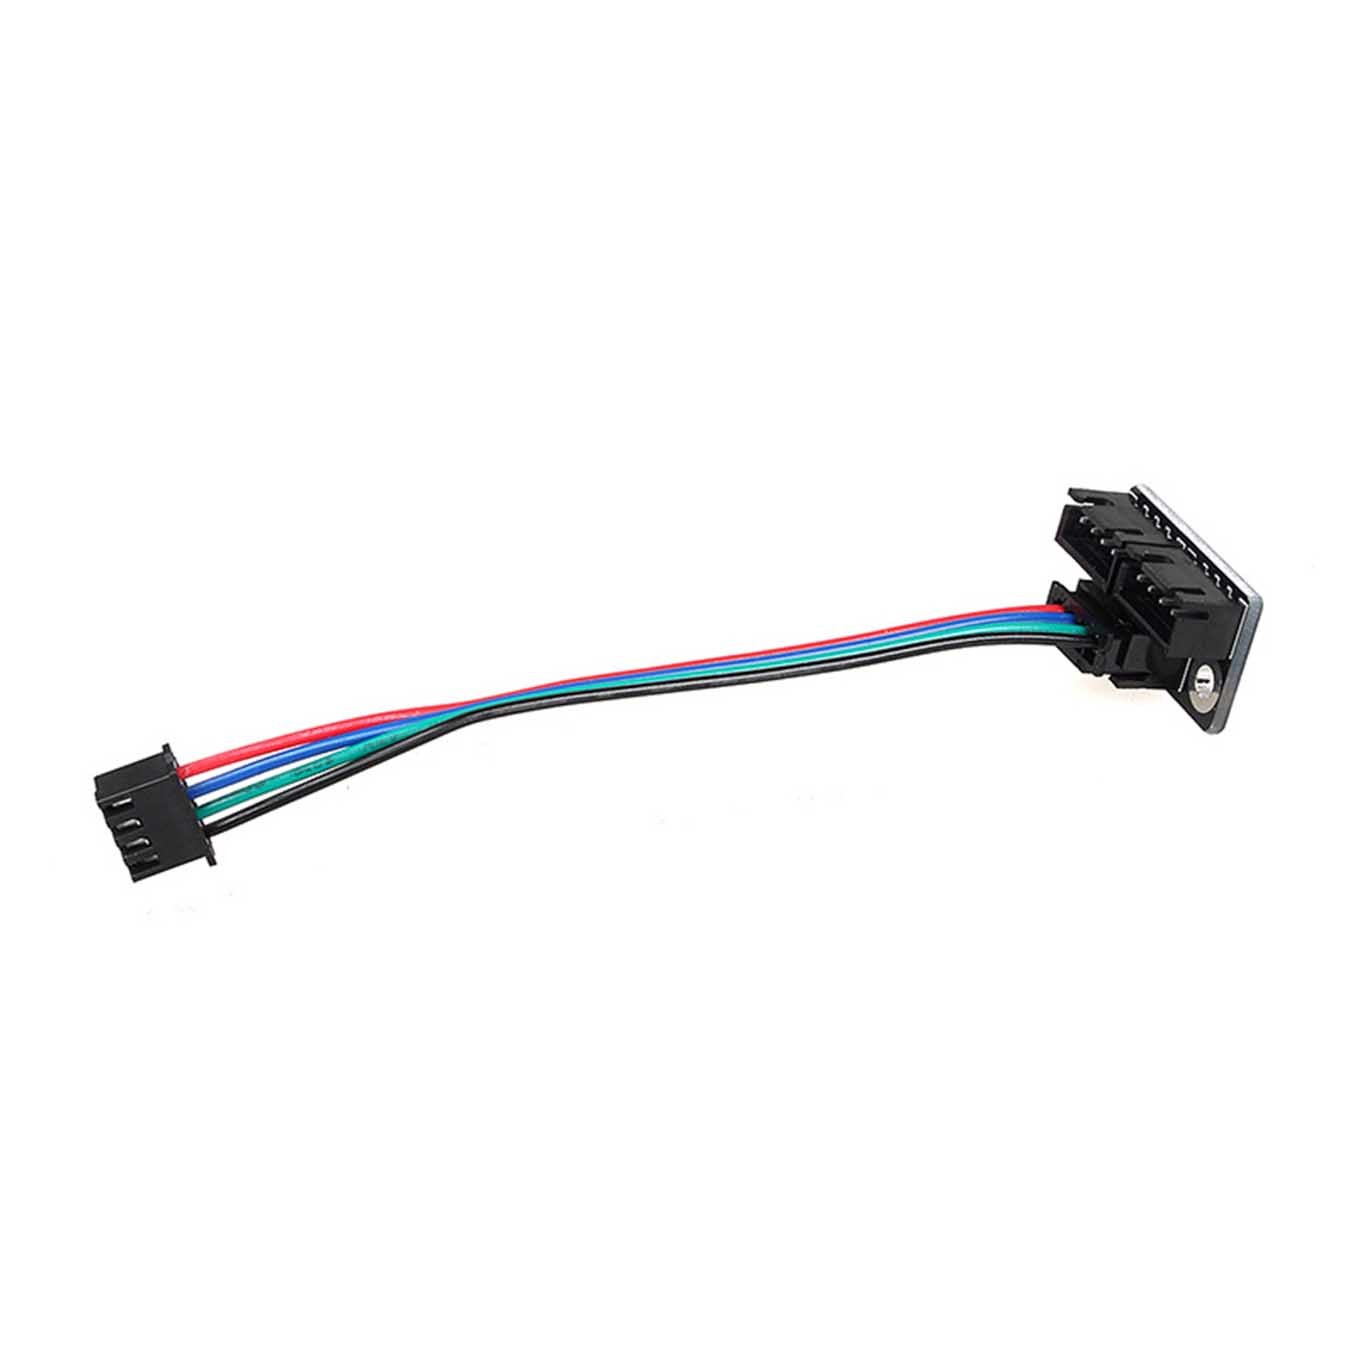  Motor Parallel Module Cable 10cm 3D Printer Mainboards 27mm*15mm Manufactures